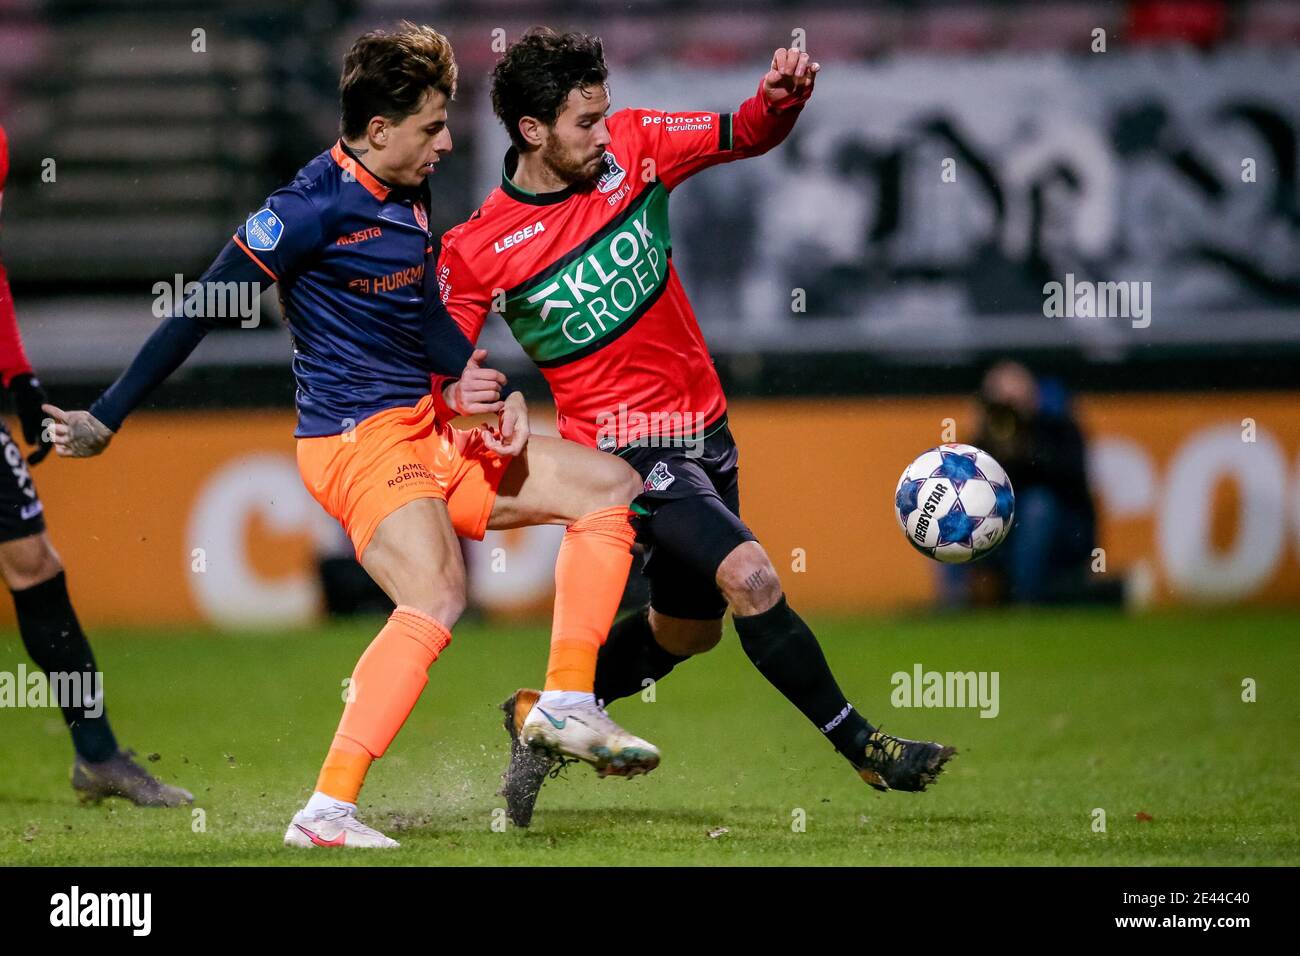 NIJMEGEN, NETHERLANDS - JANUARY 21: (L-R): Lazaros Rota of Fortuna Sittard, Jordy Bruijn of NEC during the Dutch KNVB Cup match between NEC and Fortun Stock Photo